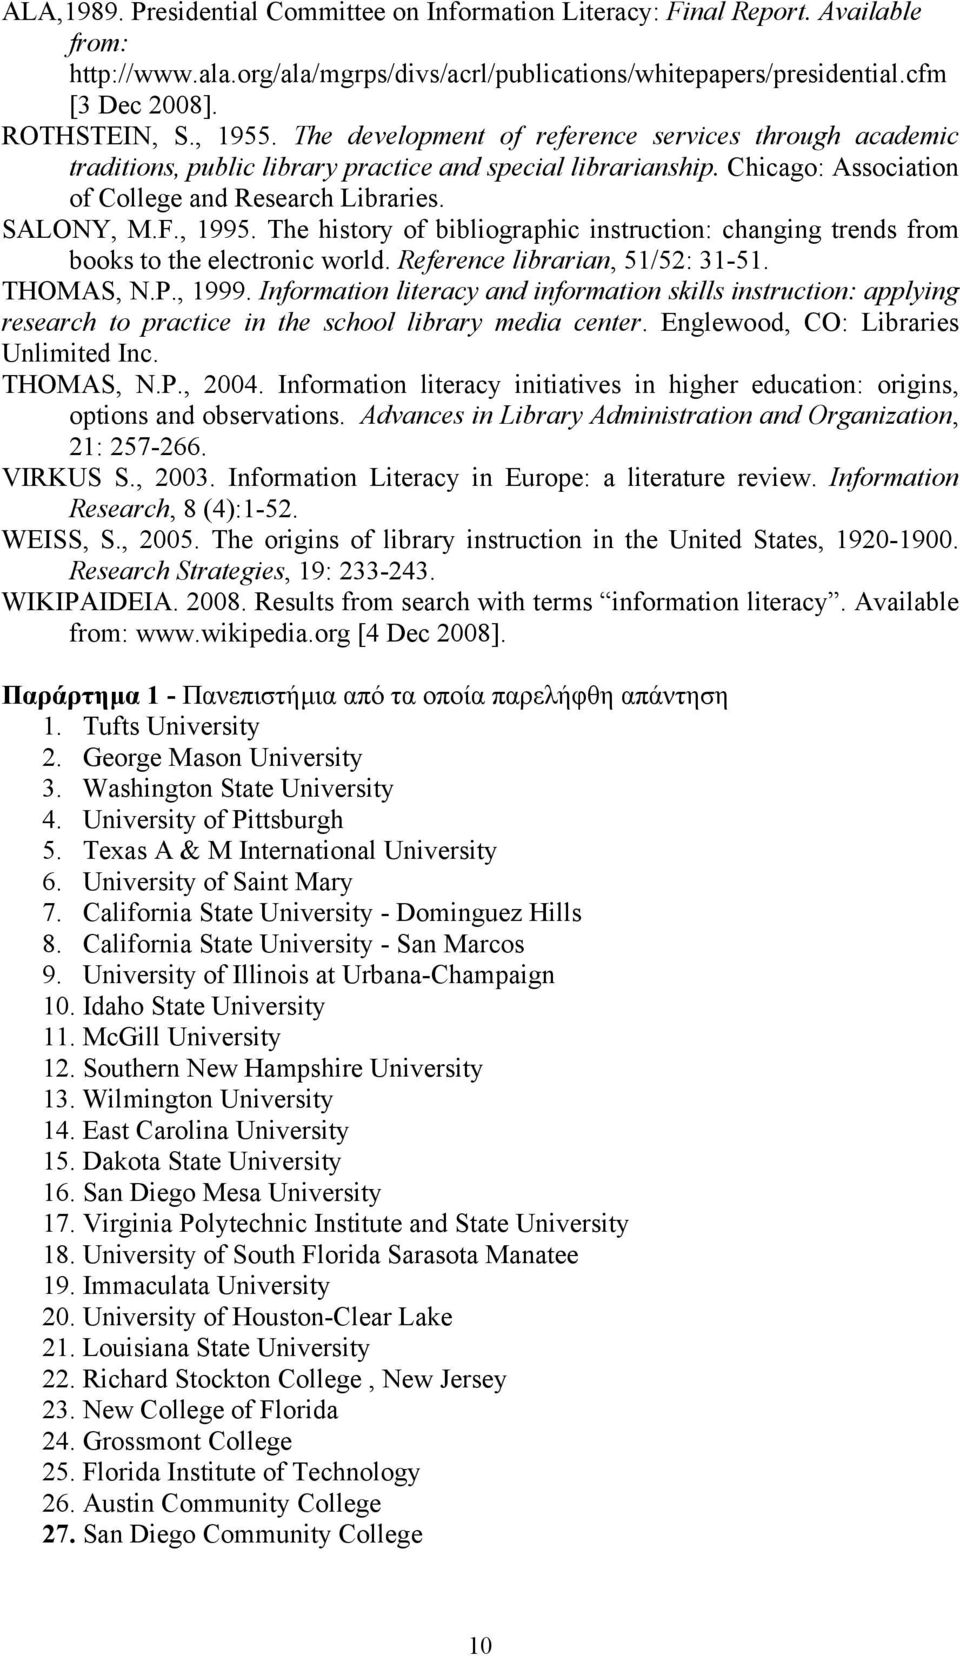 , 1995. The history of bibliographic instruction: changing trends from books to the electronic world. Reference librarian, 51/52: 31-51. THOMAS, N.P., 1999.